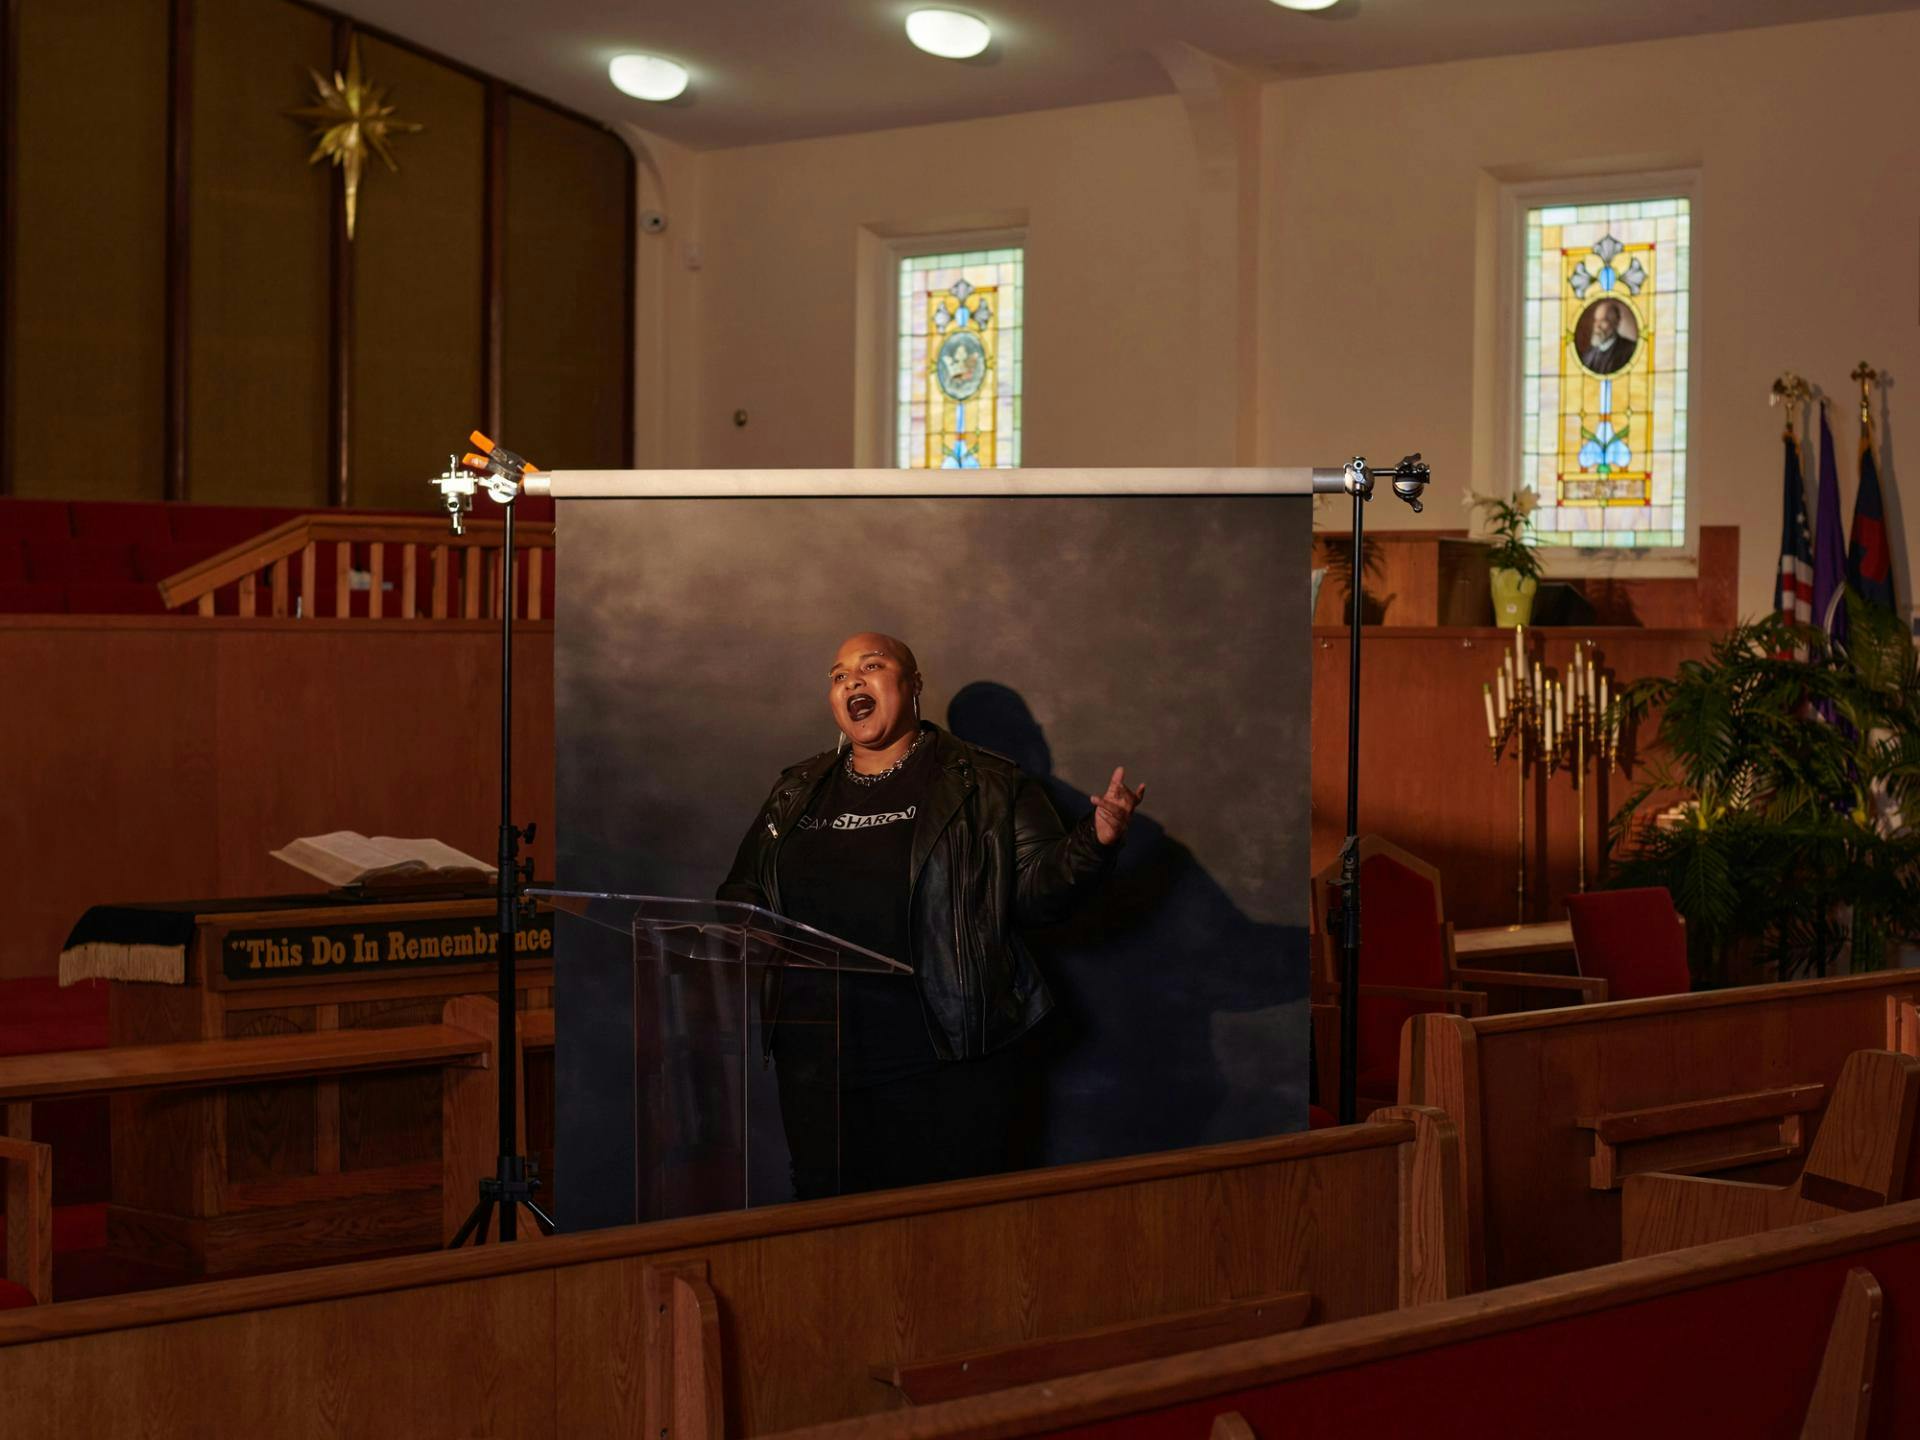 Person in front of black screen in a church-like environment